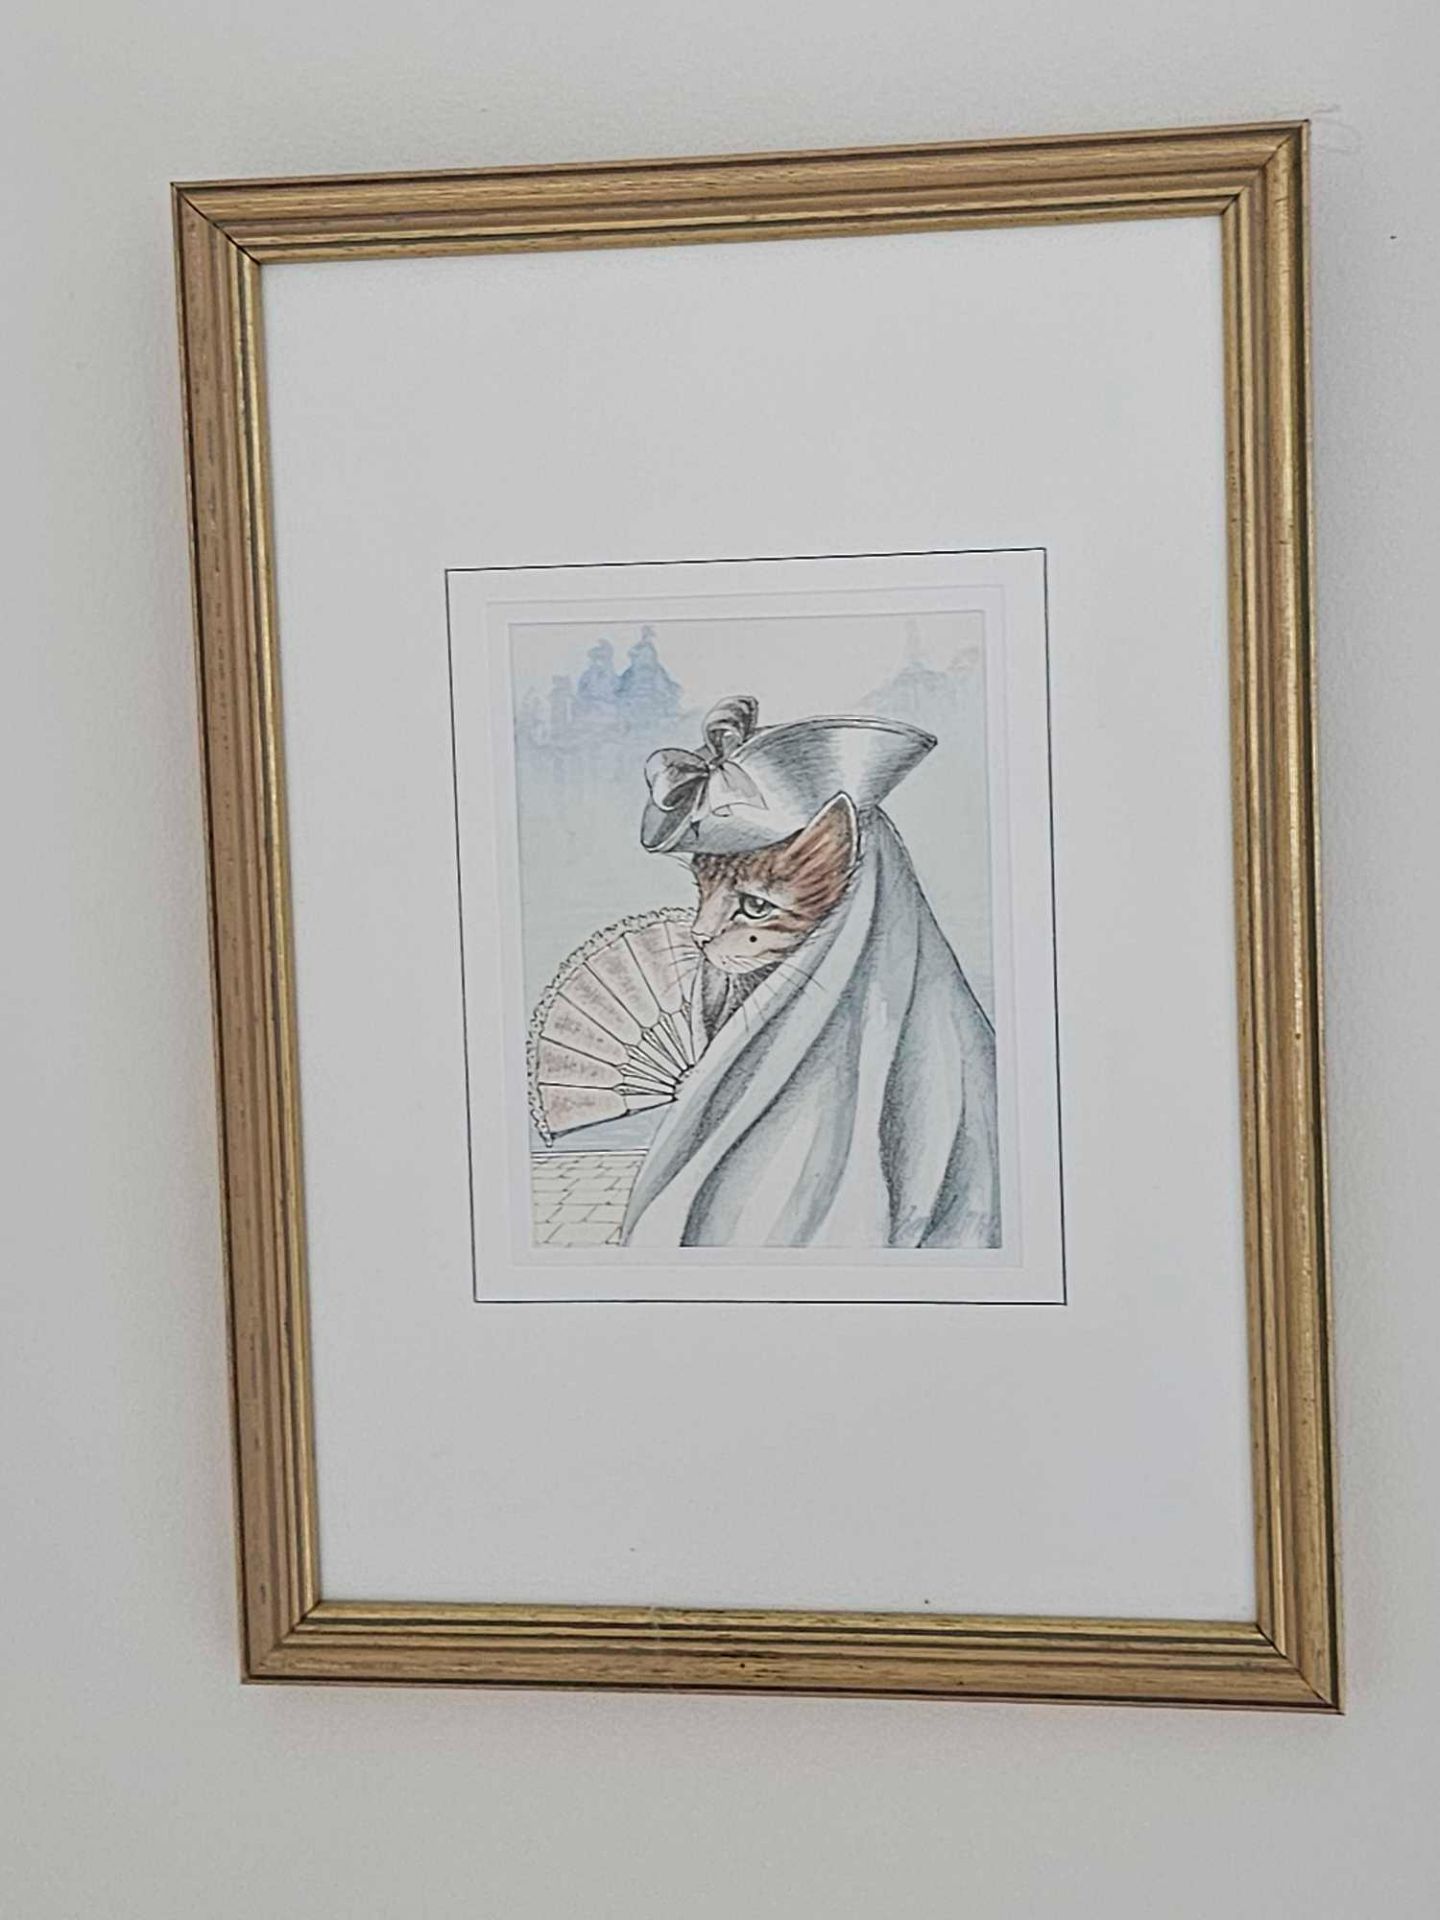 Franco Dei Rossi Soft-Focus Impressionist Print Of A Cat With Cloak, Hat And Fan In Venetian Scene - Image 2 of 3